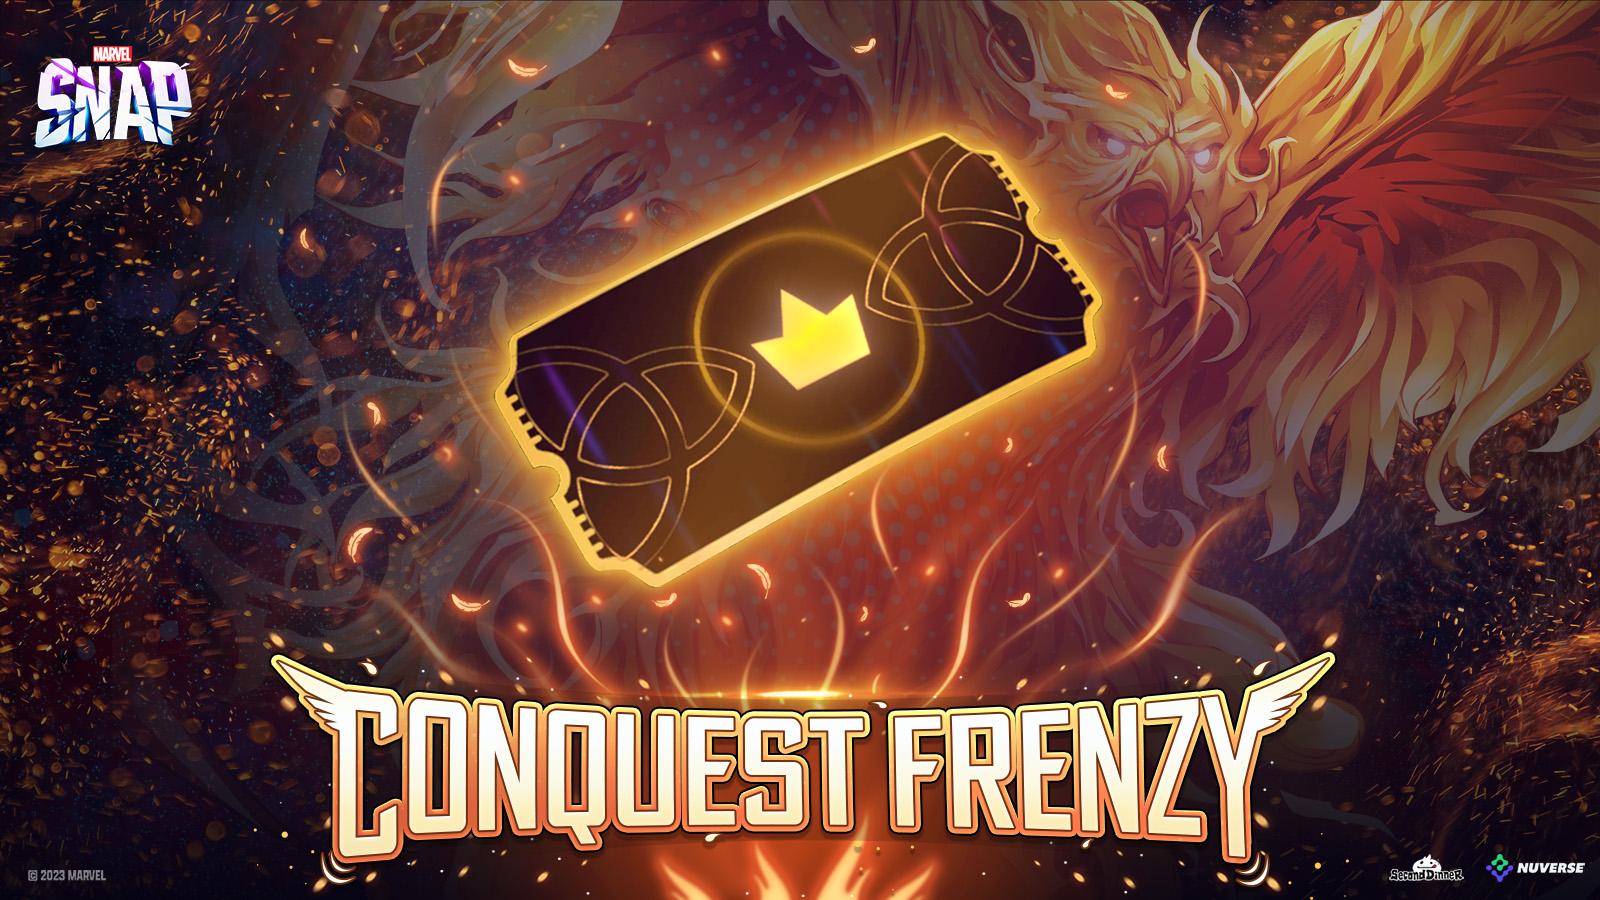 Marvel Snap's new game mode Conquest Frenzy